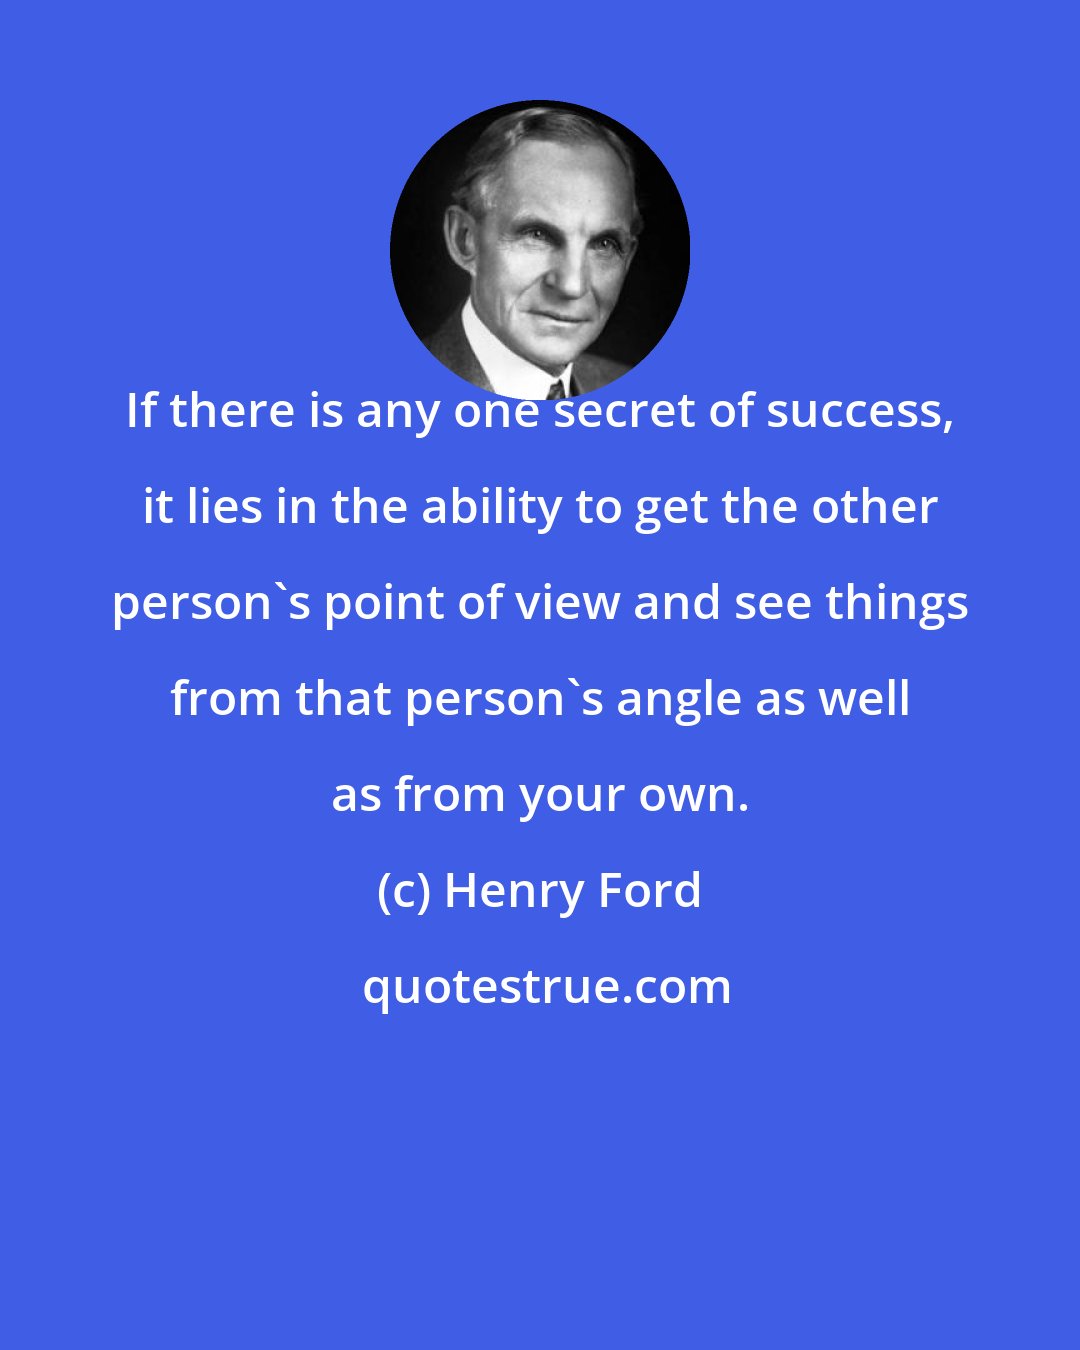 Henry Ford: If there is any one secret of success, it lies in the ability to get the other person's point of view and see things from that person's angle as well as from your own.